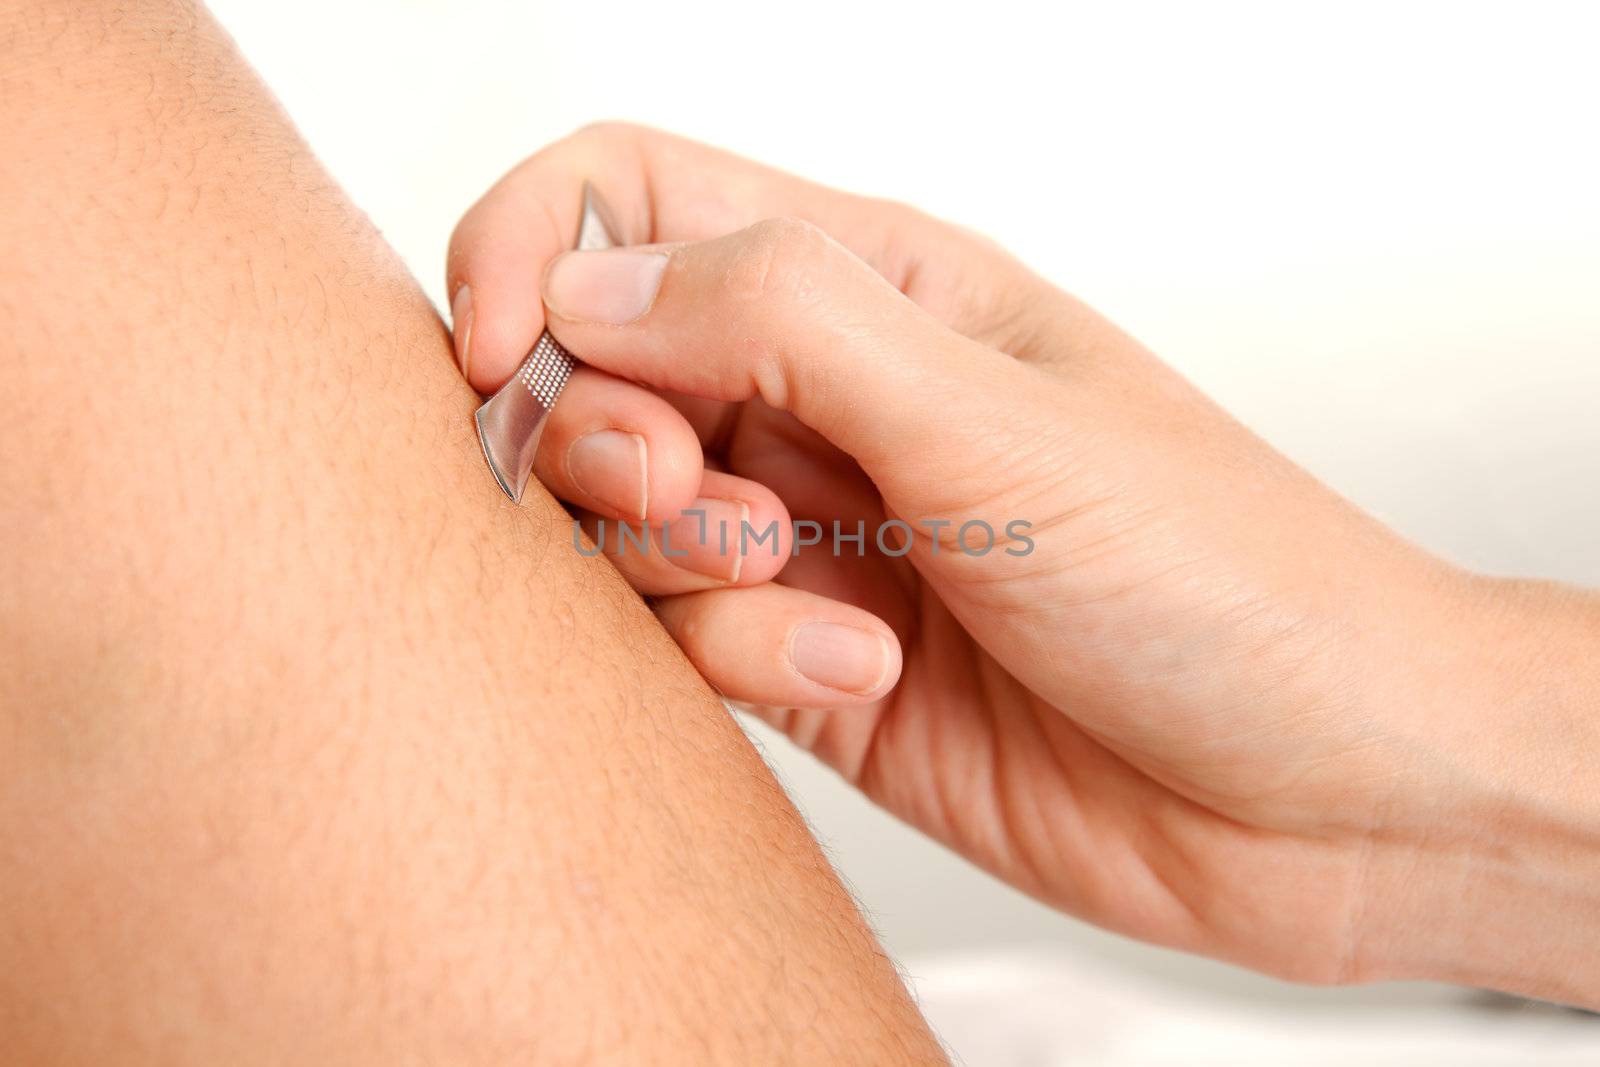 Choto acupuncture tool used on the leg of a young male